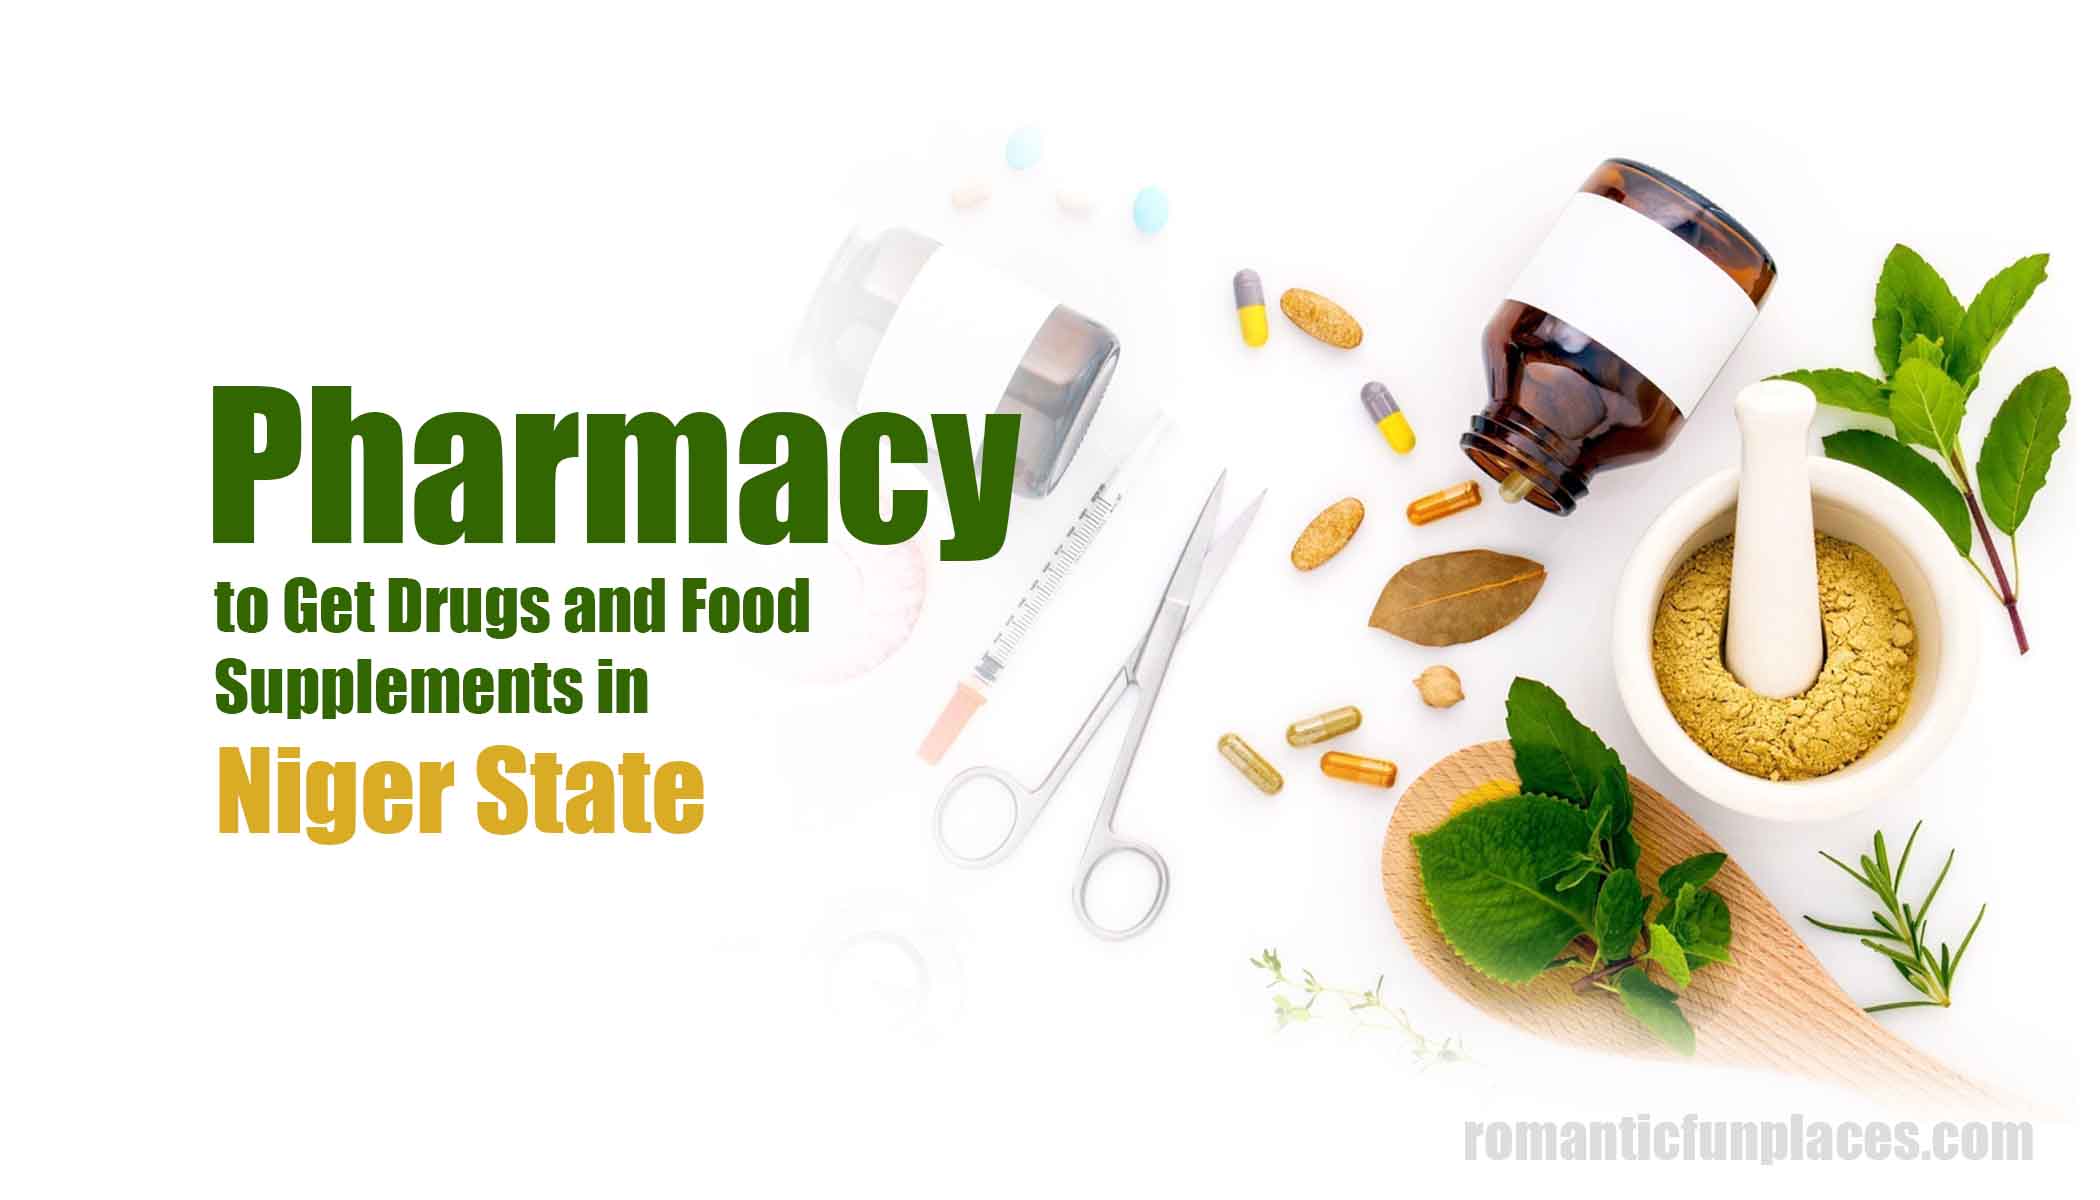 Pharmacy to Get Drugs and Food Supplements in Niger State